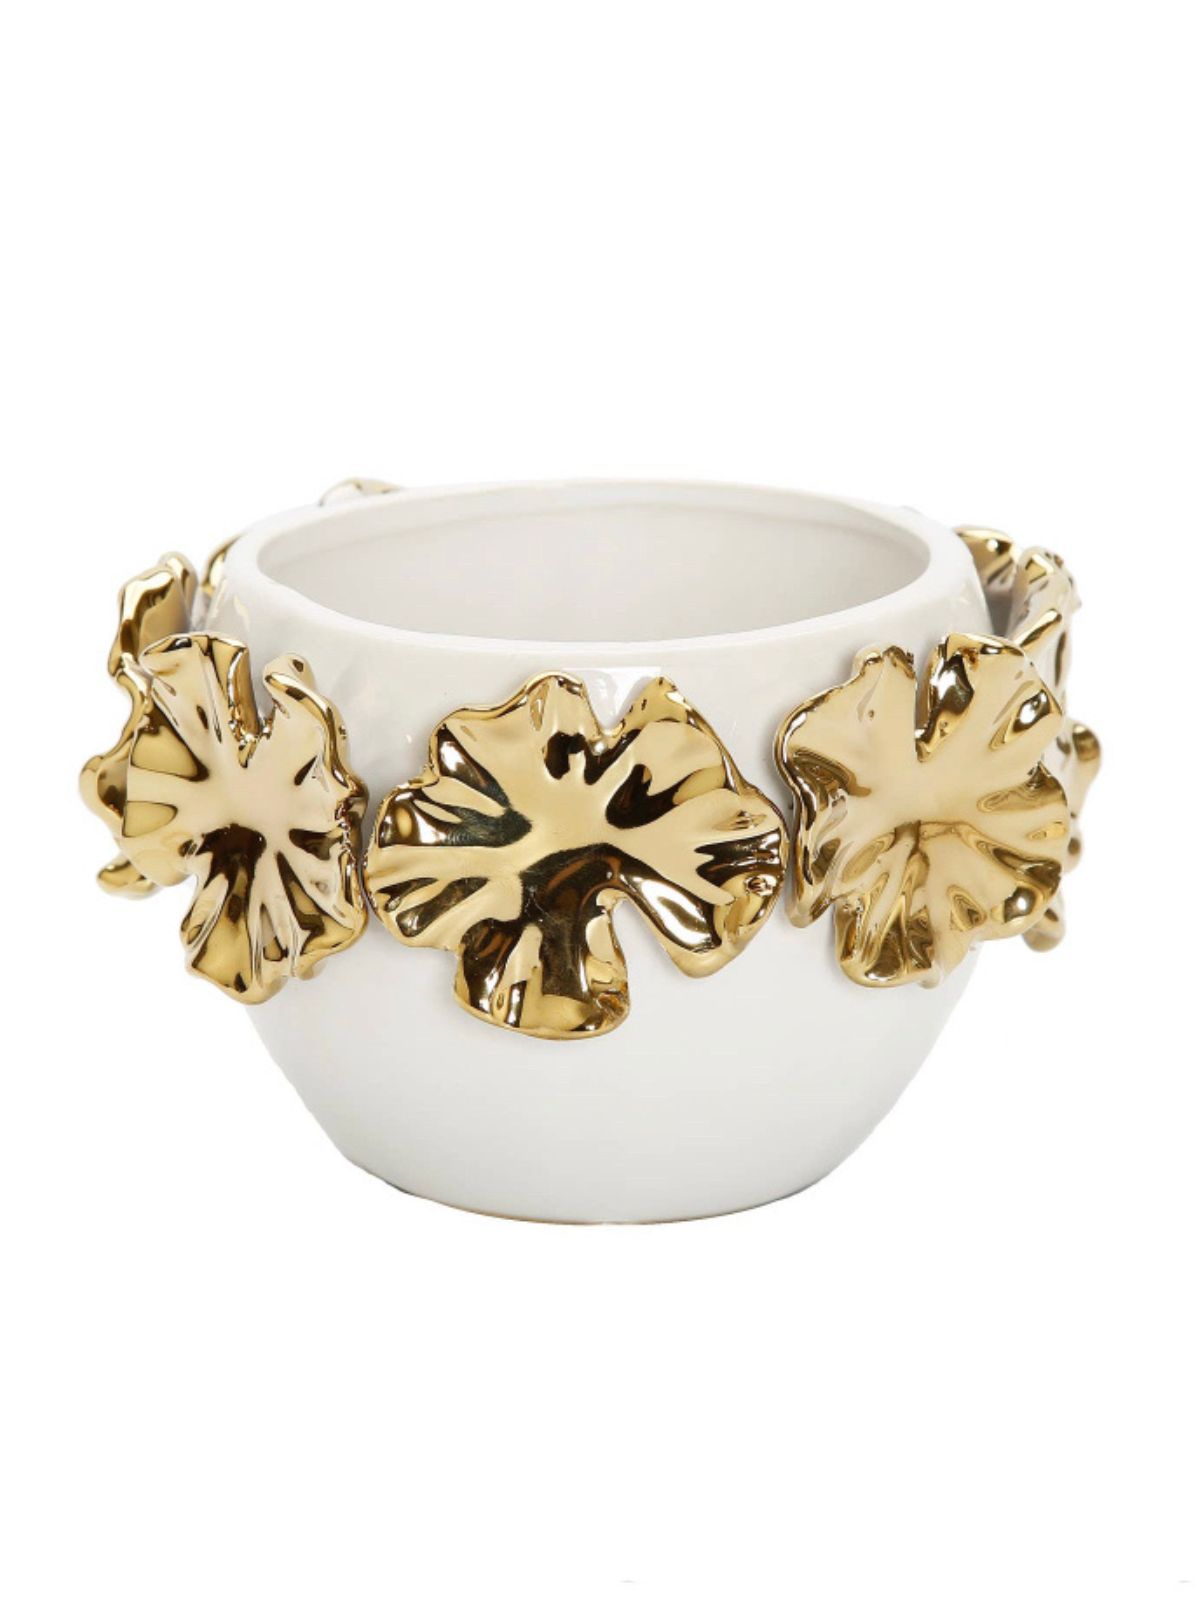 This fascinating Rosalinda white bowl with gold flower petals is a must-have item to glamorize your home. The white base enhances the bold gold floral on top. This unique piece can be styled in multiple ways. 